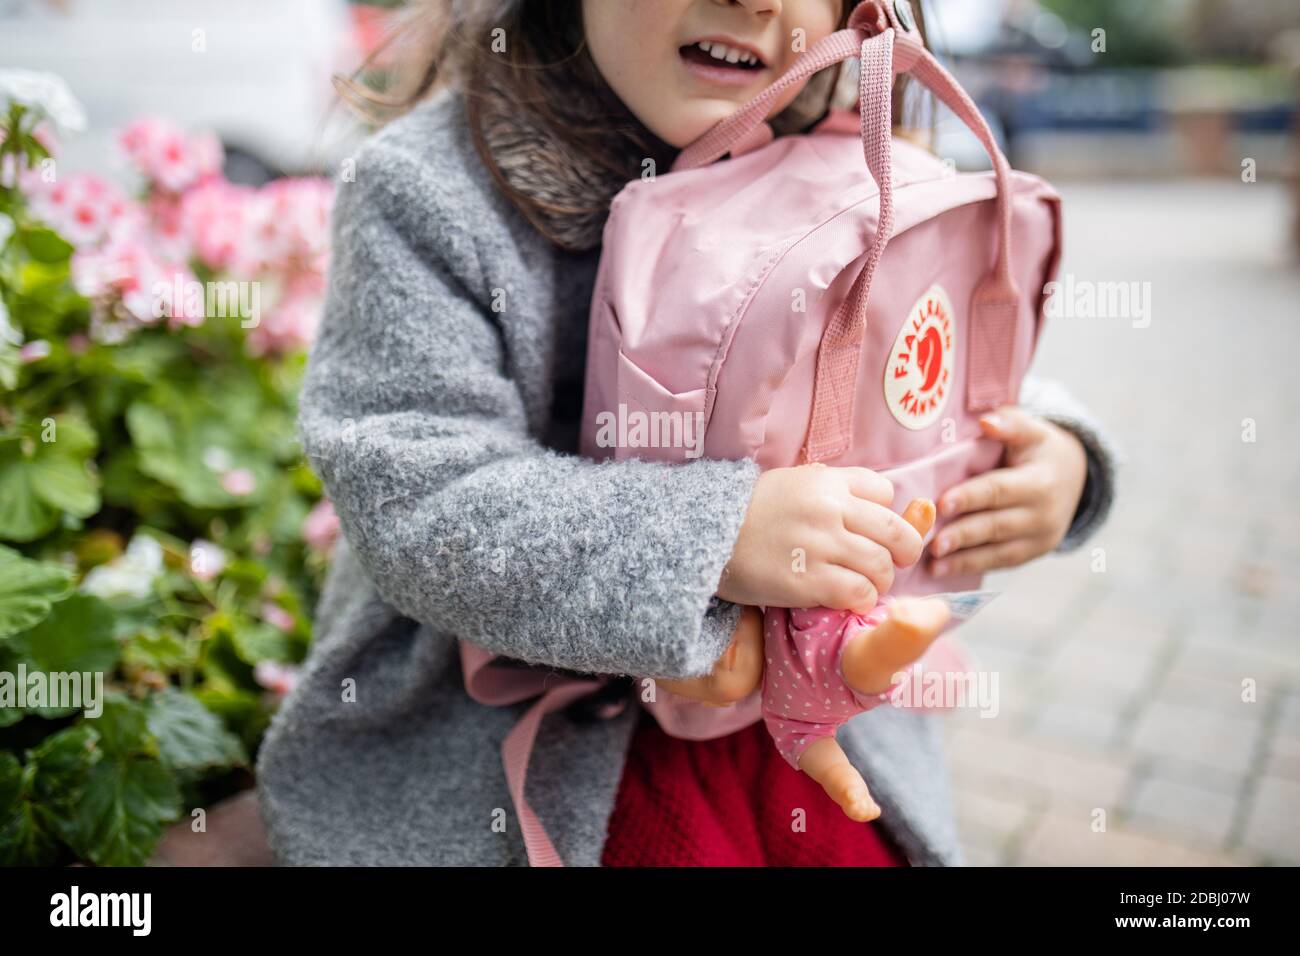 Little girl with flowers behind her hugging a pink backpack and small doll Stock Photo